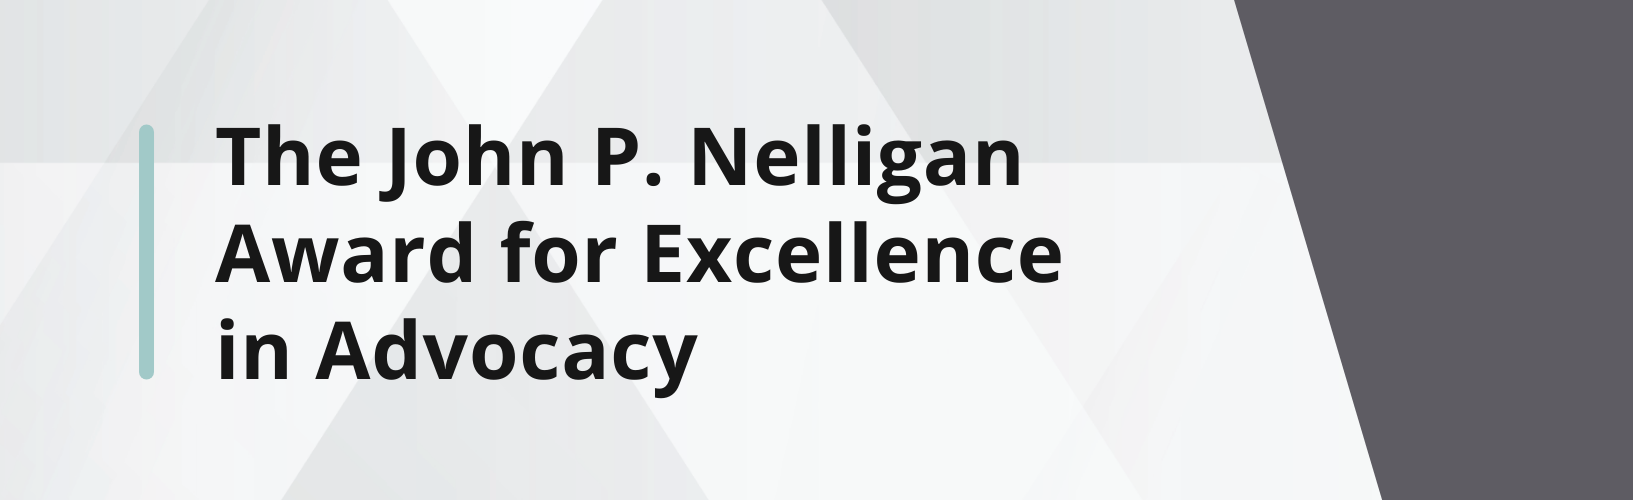 The John P. Nelligan Award for Excellence in Advocacy